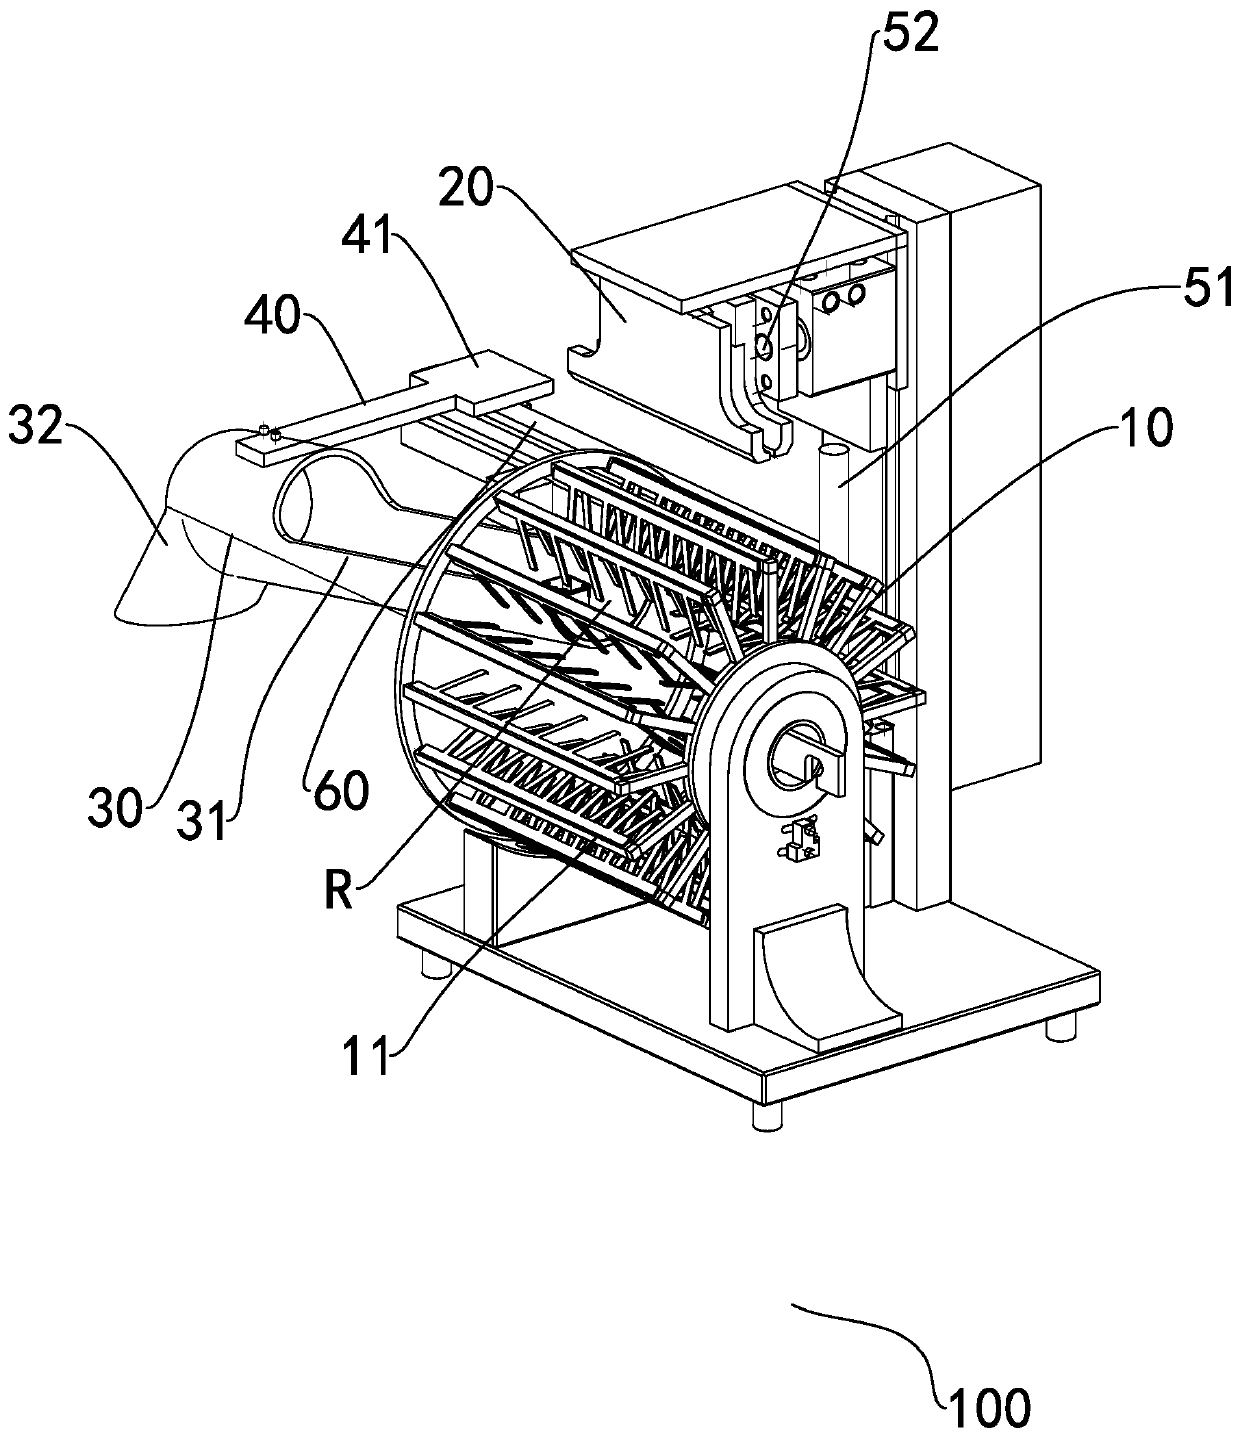 Feeding device and feeding method in anodizing process of aluminum die casting